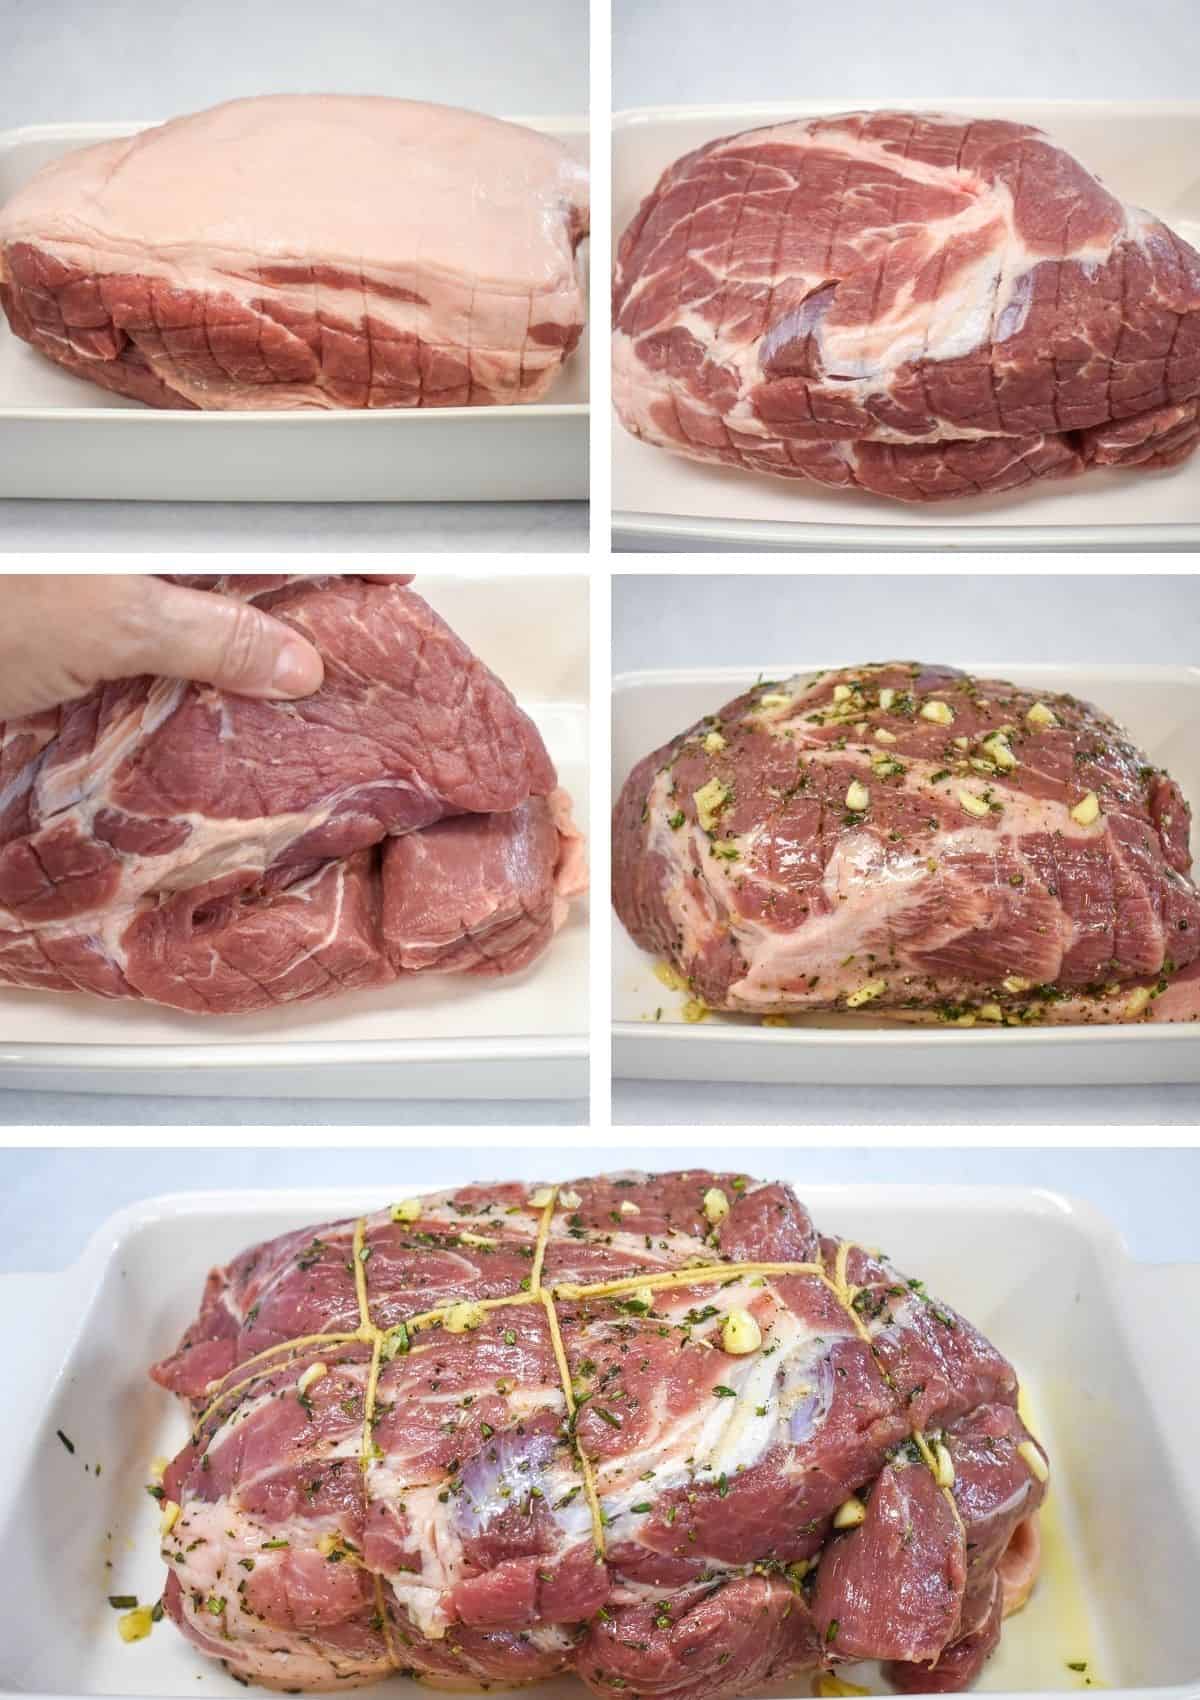 A collage of five images showing the pork fat side up, fat side down, the slit, and the final two pictures show the pork with the garlic herb marinade and the final one it is tied with twine.